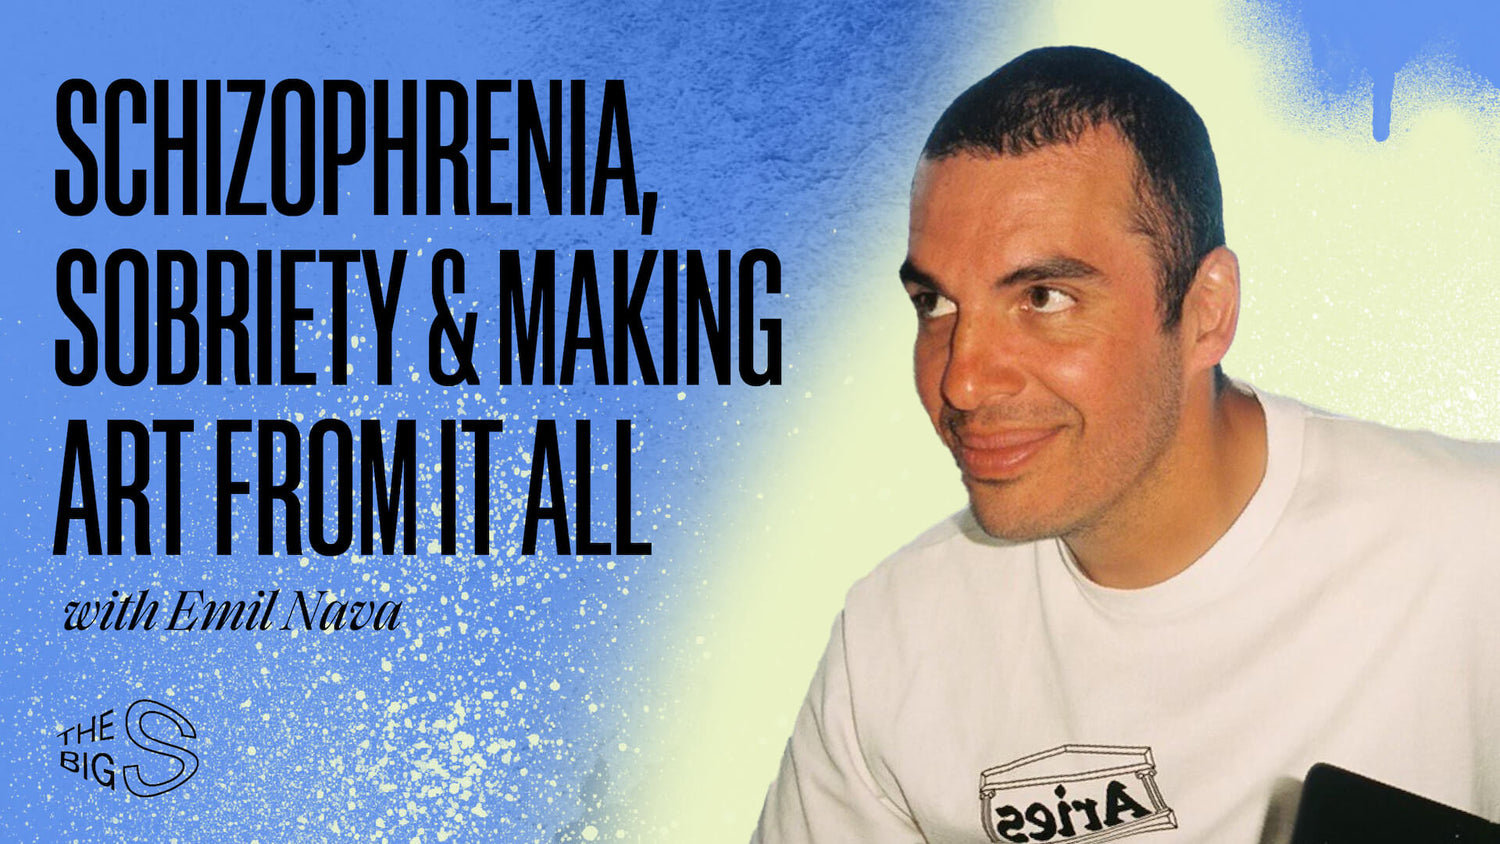 26. Schizophrenia, Sobriety & Making Art From It All with Emil Nava